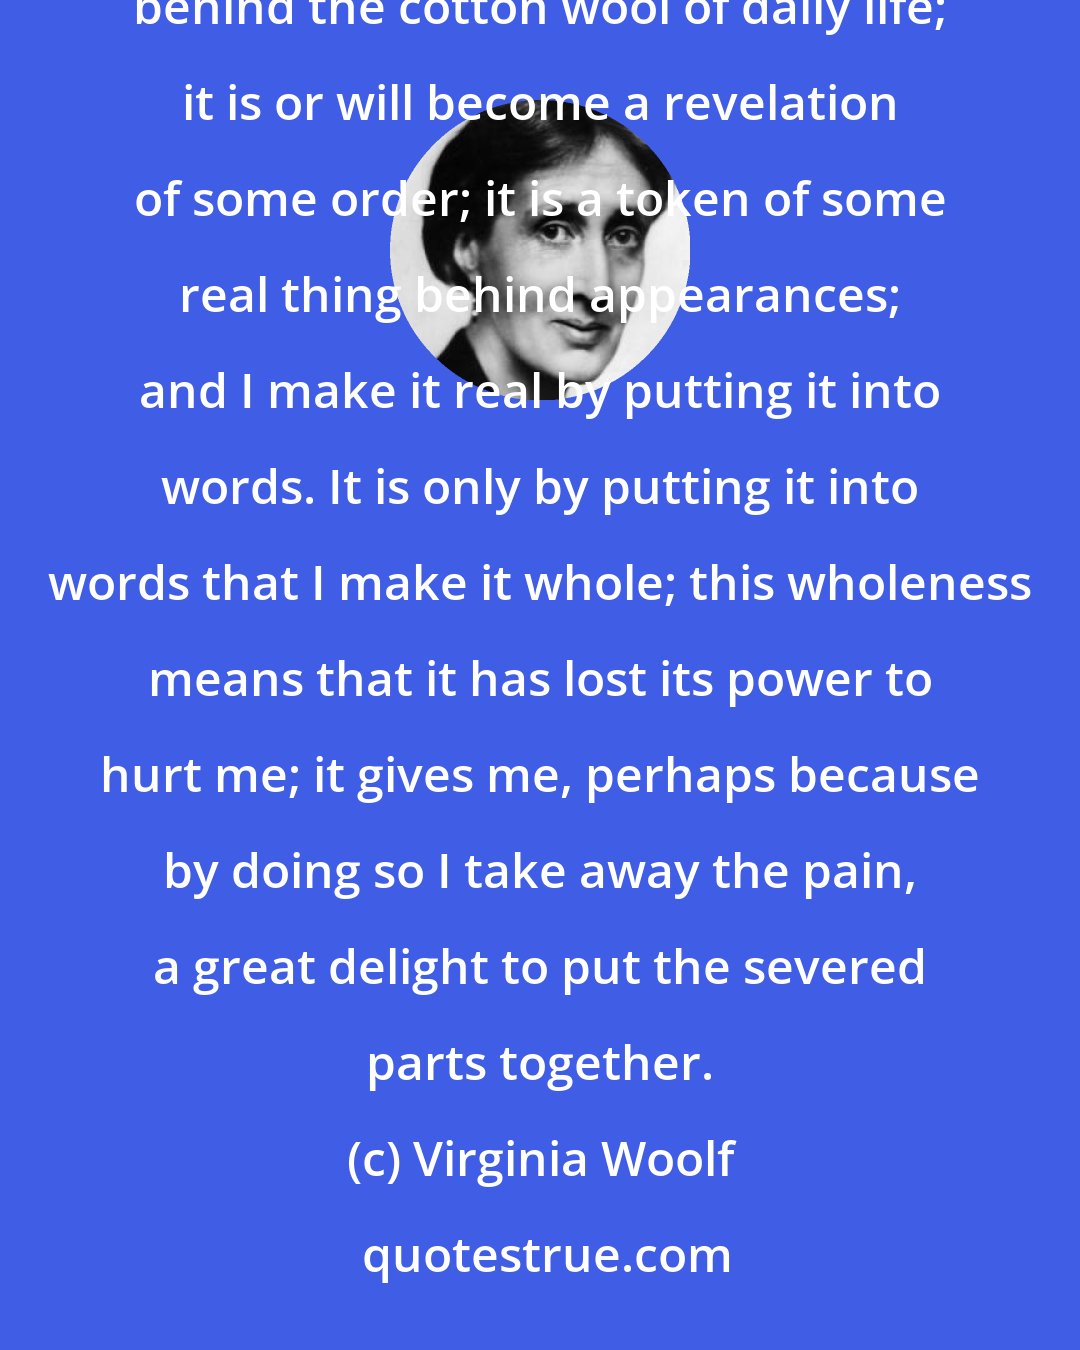 Virginia Woolf: I feel that I have had a blow; but it is not, as I thought as a child, simply a blow from an enemy hidden behind the cotton wool of daily life; it is or will become a revelation of some order; it is a token of some real thing behind appearances; and I make it real by putting it into words. It is only by putting it into words that I make it whole; this wholeness means that it has lost its power to hurt me; it gives me, perhaps because by doing so I take away the pain, a great delight to put the severed parts together.